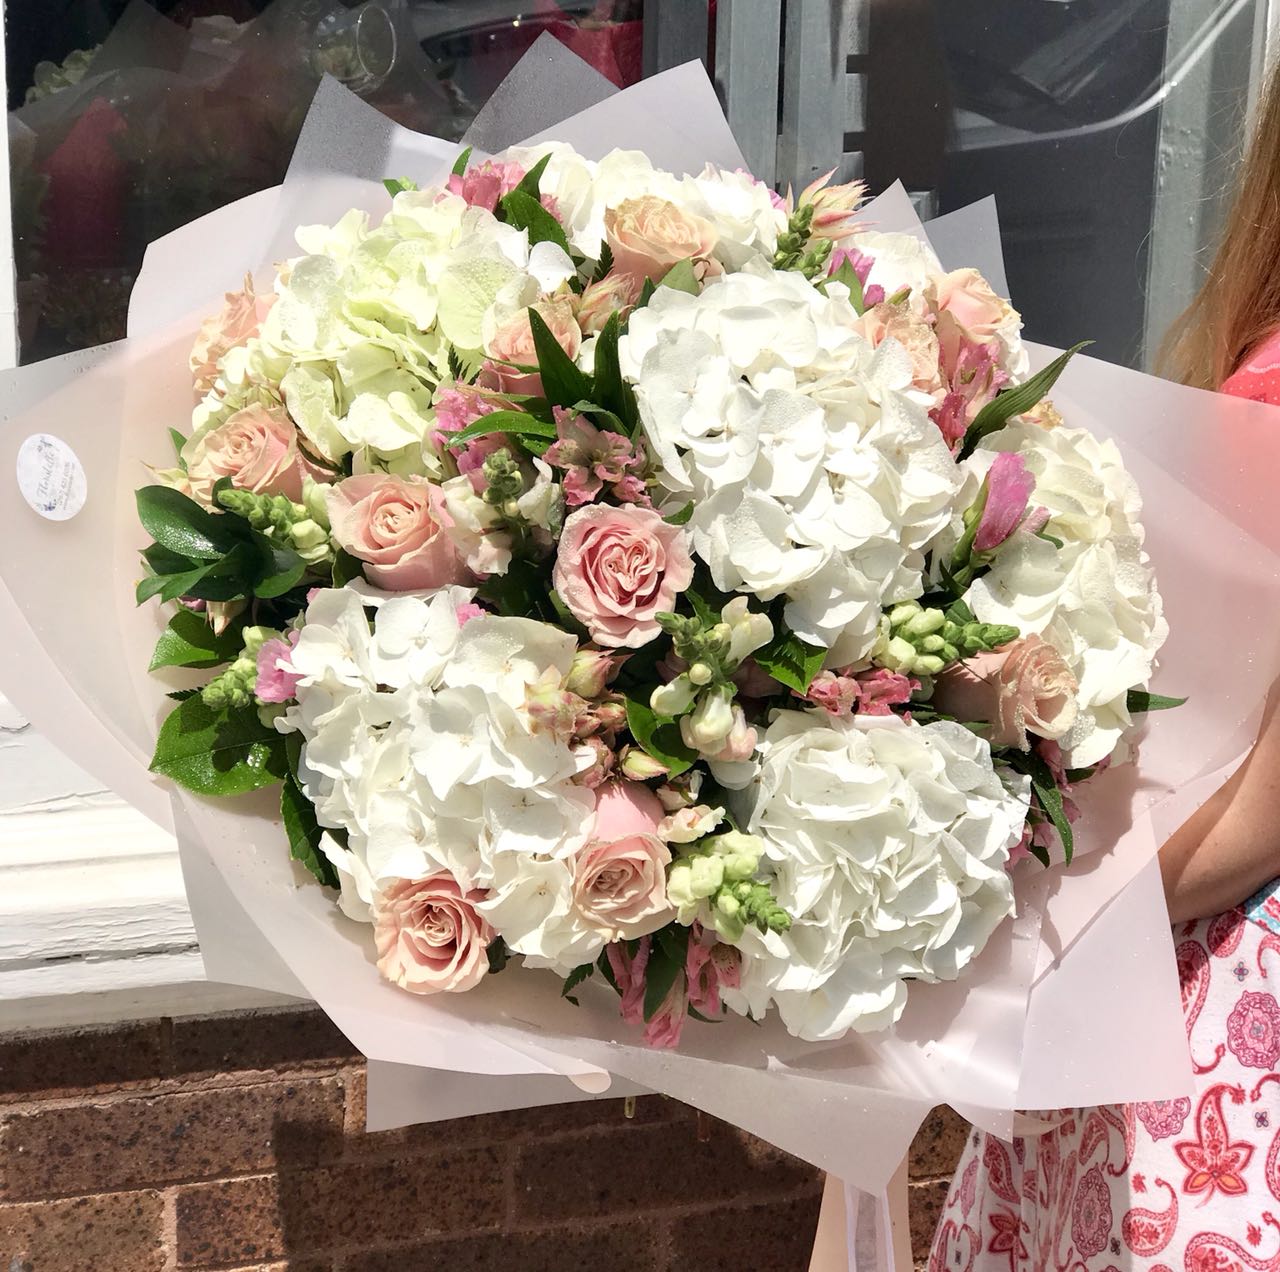 Stunning in its simplicity, this innocent harmony of light pink roses and snow white hydrangeas are a heartfelt way to send your very best.  Includes:  White hydrangea, light pink roses, pink alstoemerias, assorted greens. Wrapping in a craft paper. Free message card